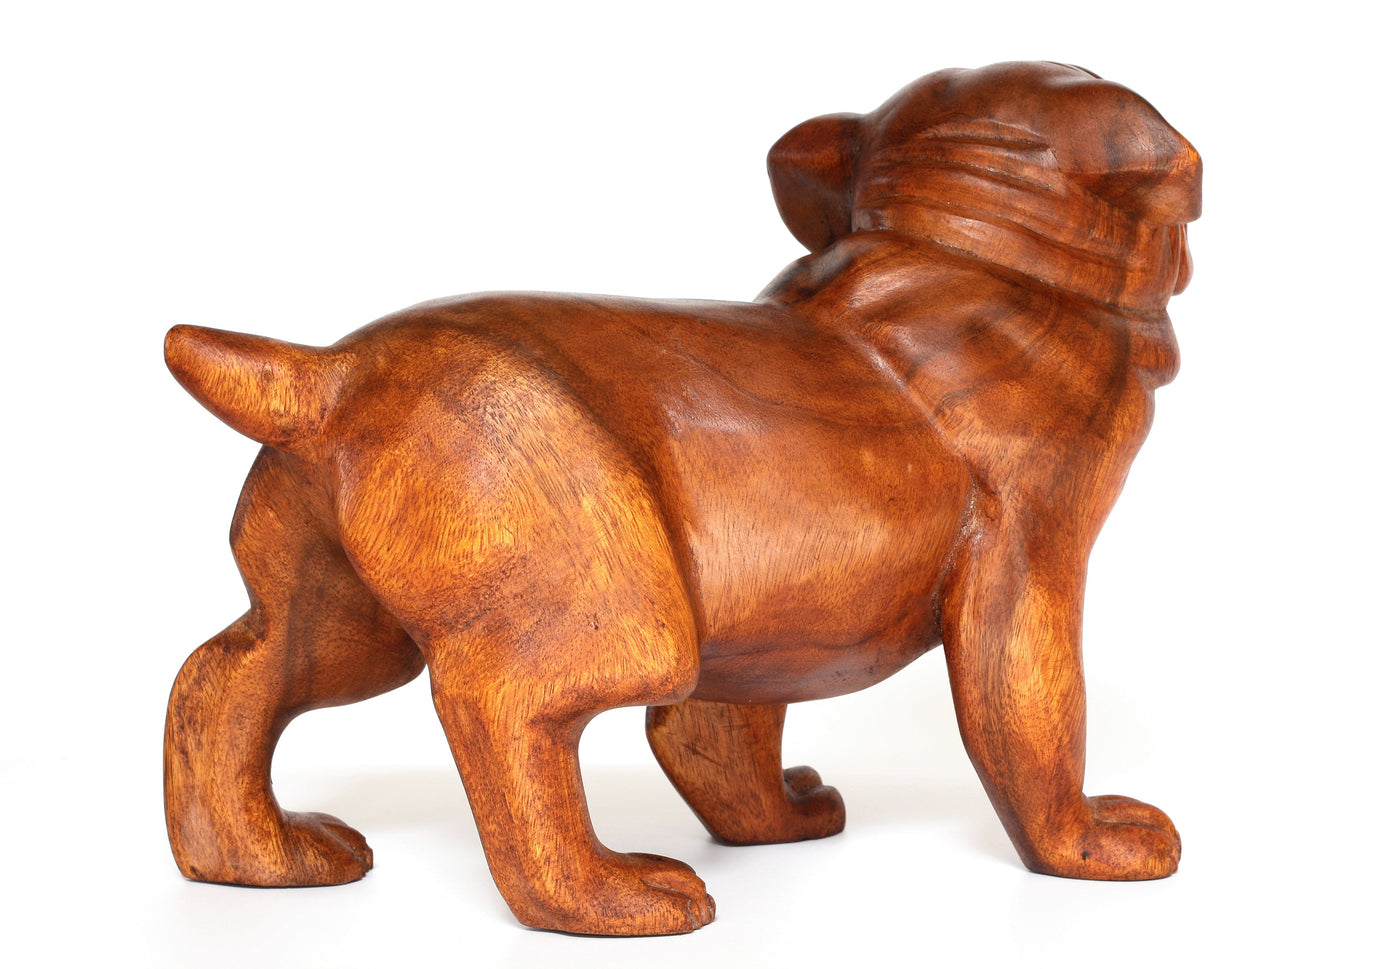 Wooden Hand Carved Walking Bulldog Statue Figurine Sculpture Art Rustic Home Decor Accent Handmade Handcrafted Wood Gift Dog Artwork